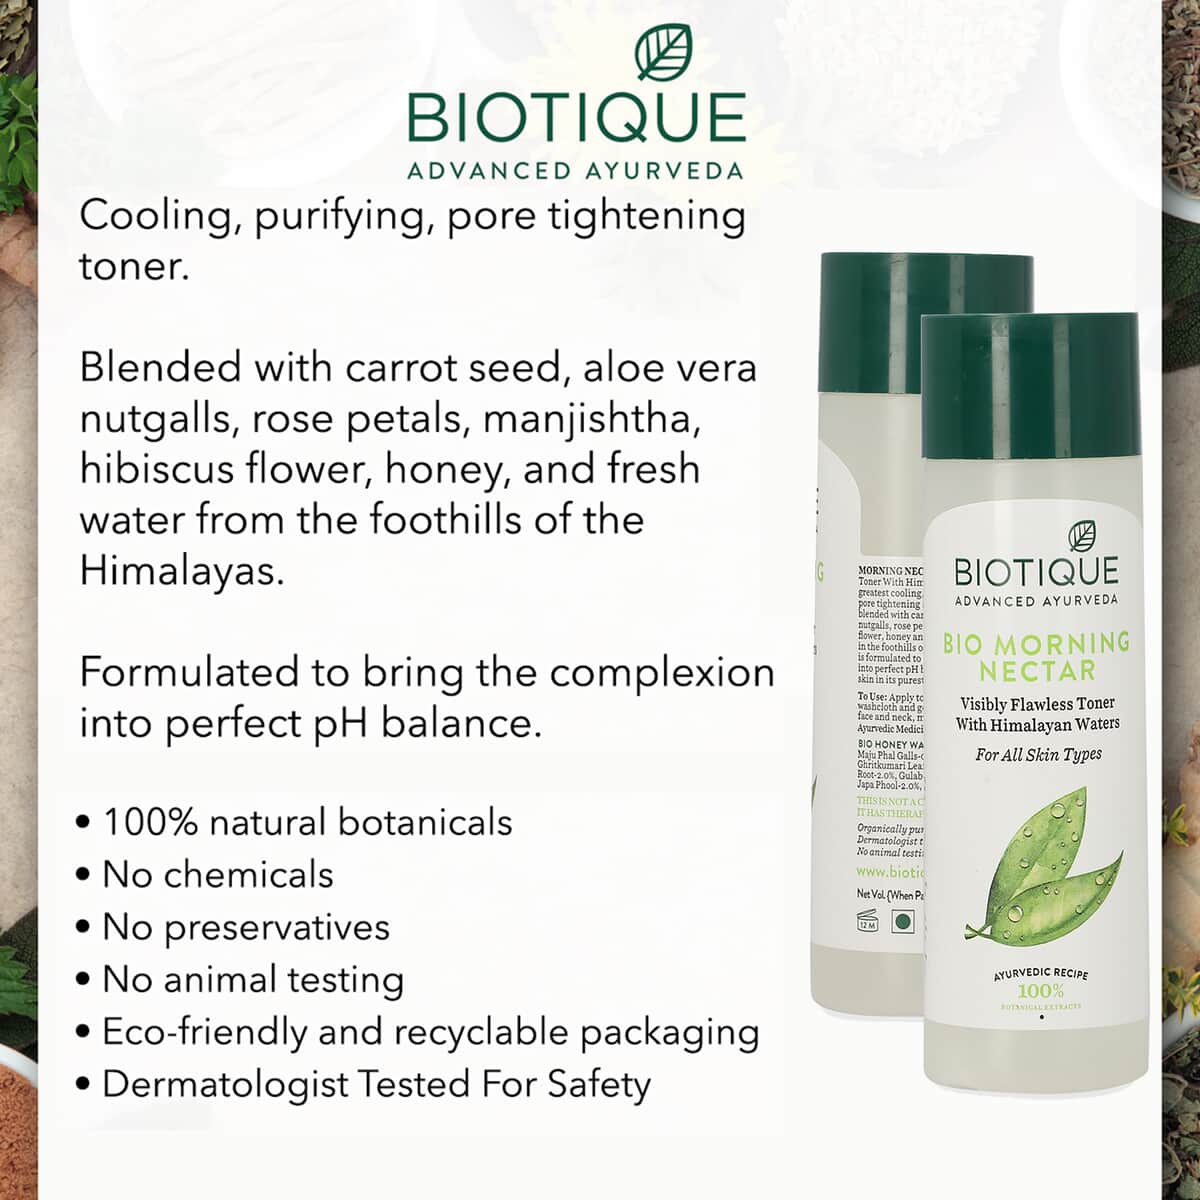 BIOTIQUE Advanced Ayurveda Visibly Flawless Toner with Himalayan Waters For All Skin Types image number 2